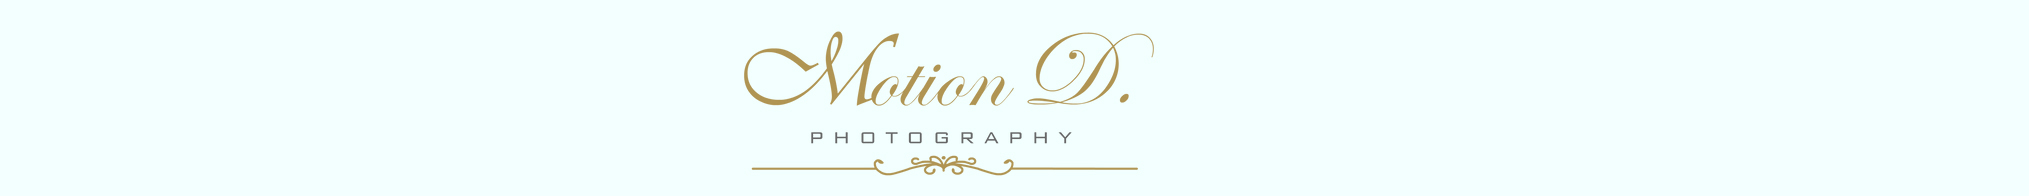 mption d photography